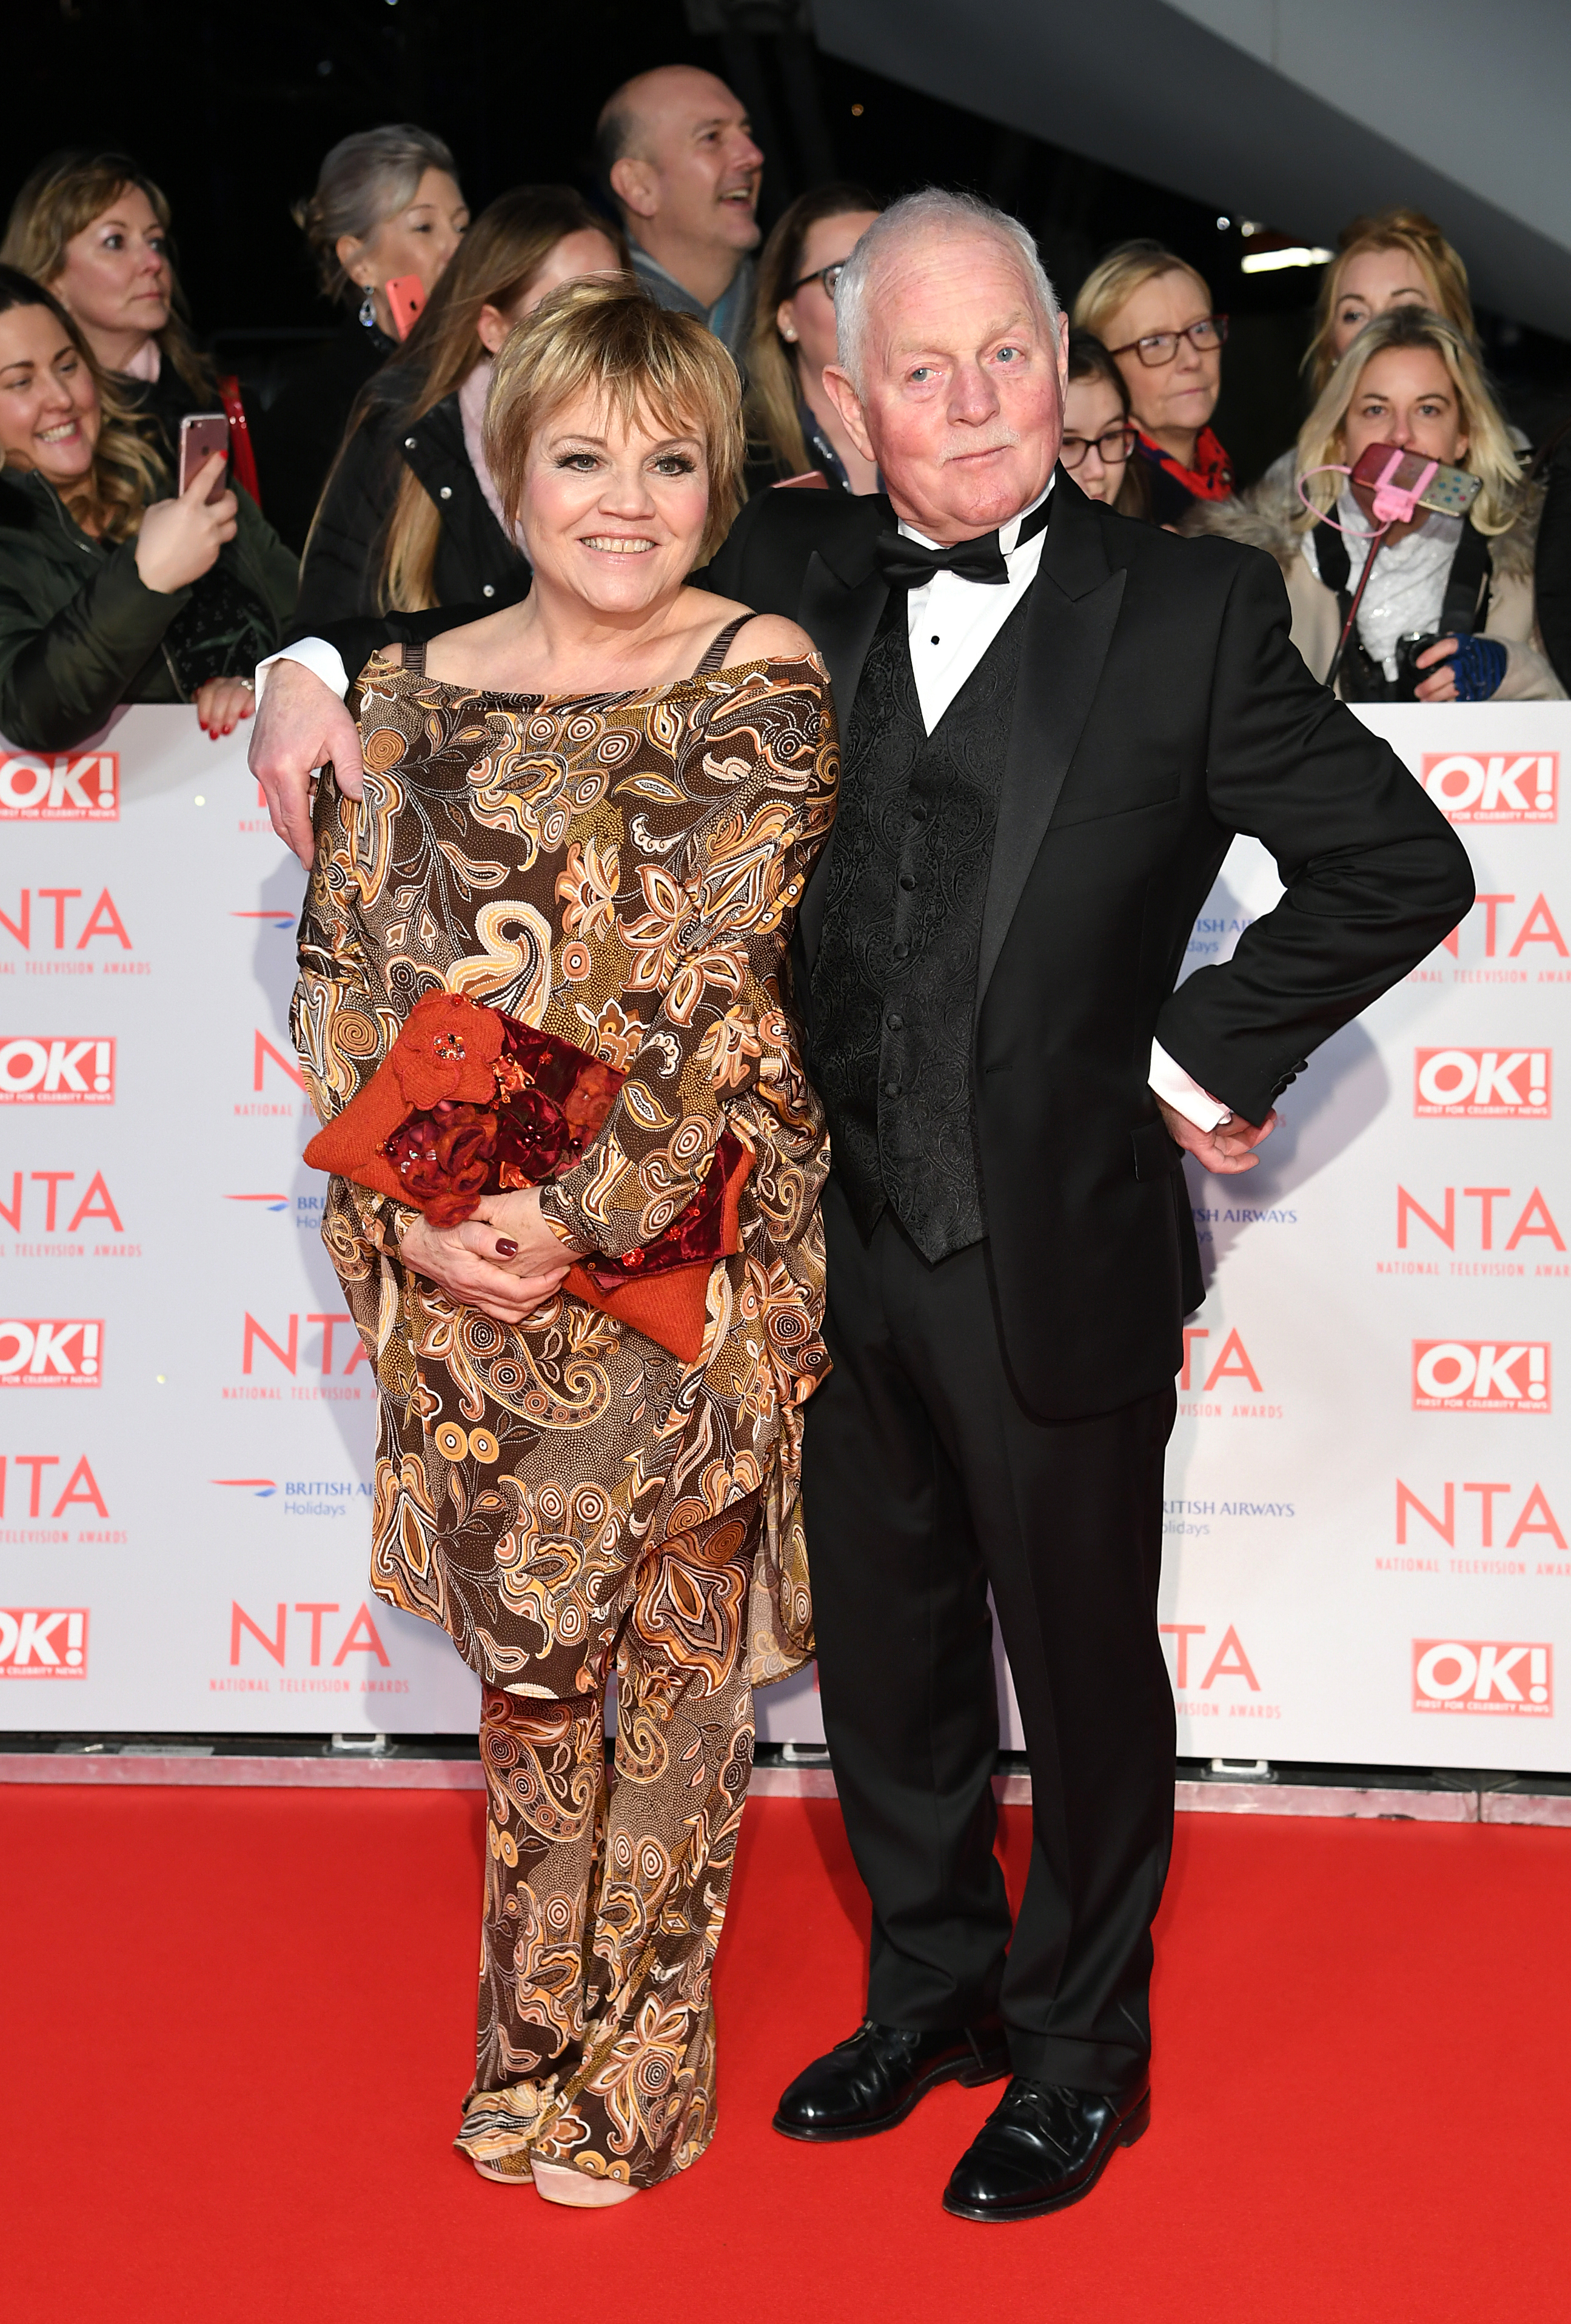 lesley dunlop and christ chittell on the red carpet for the NTA awards